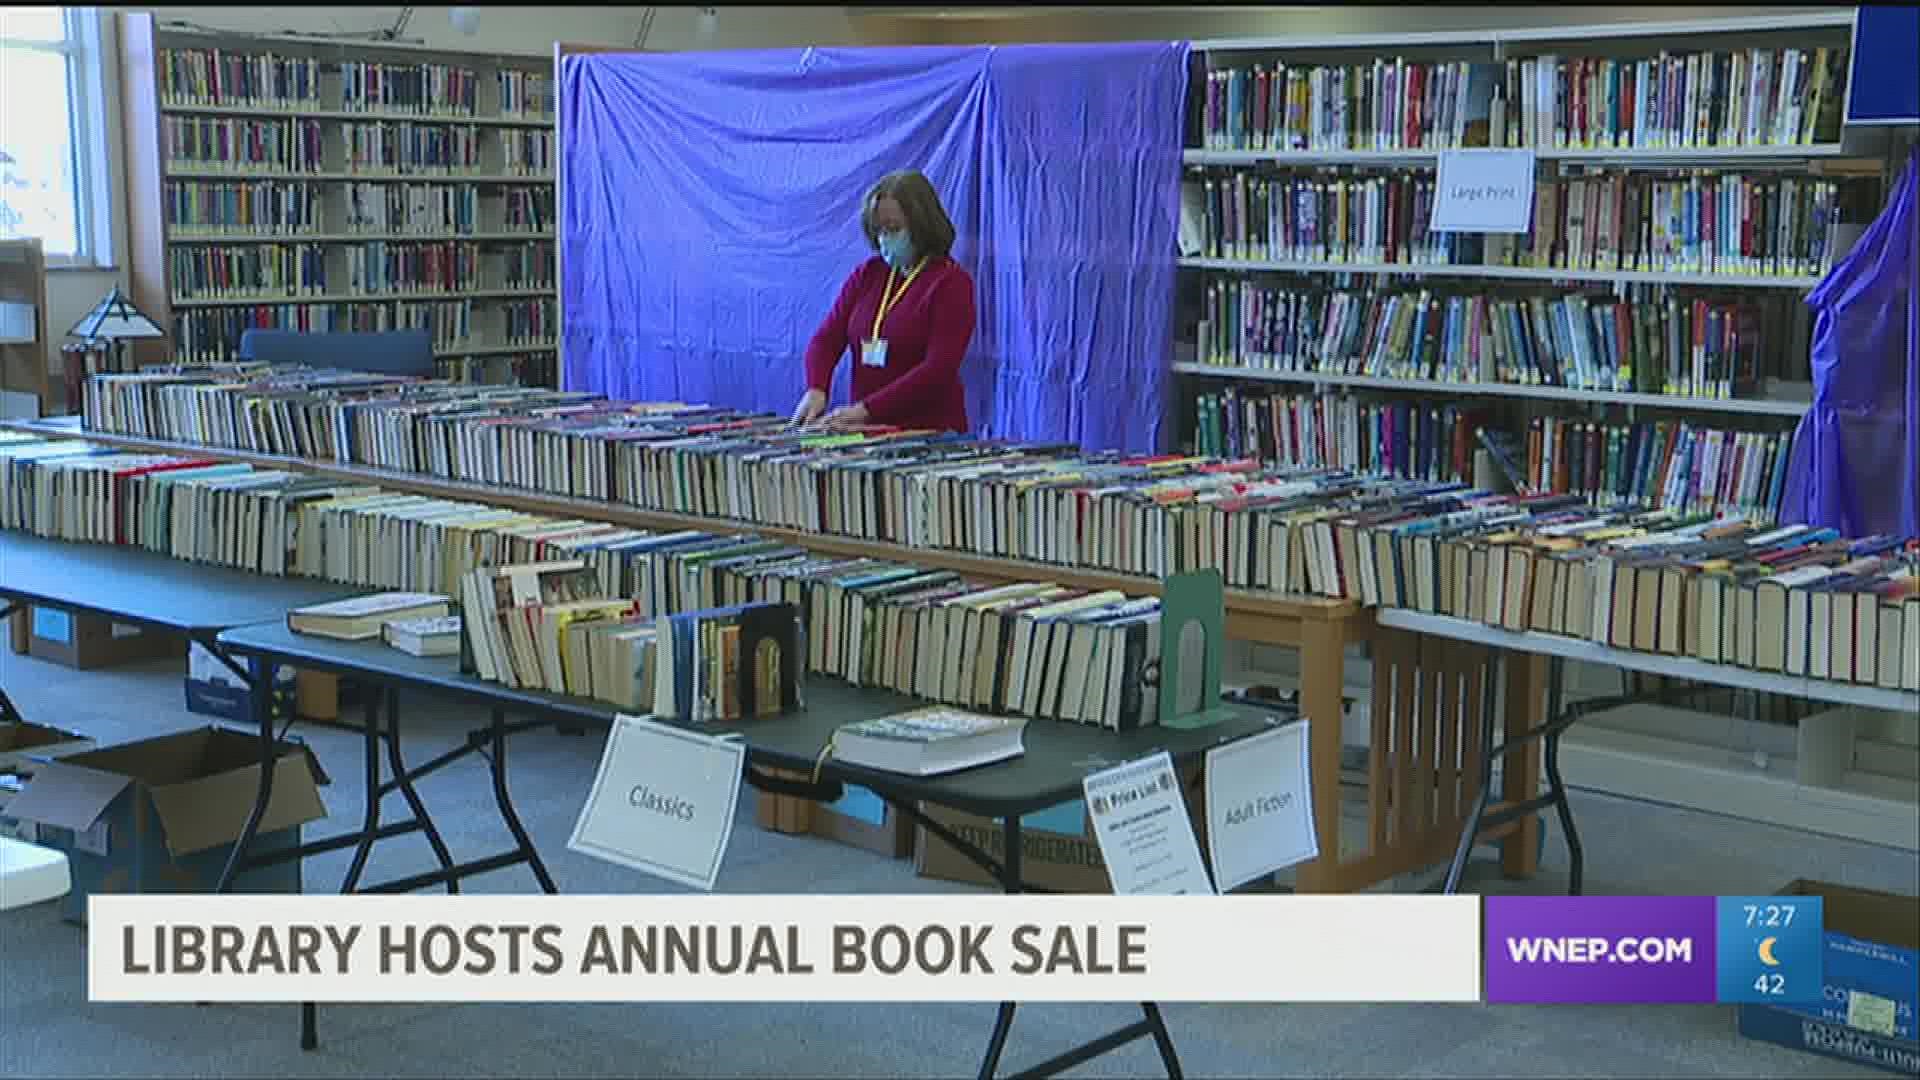 The book sale is the library's annual fundraiser.